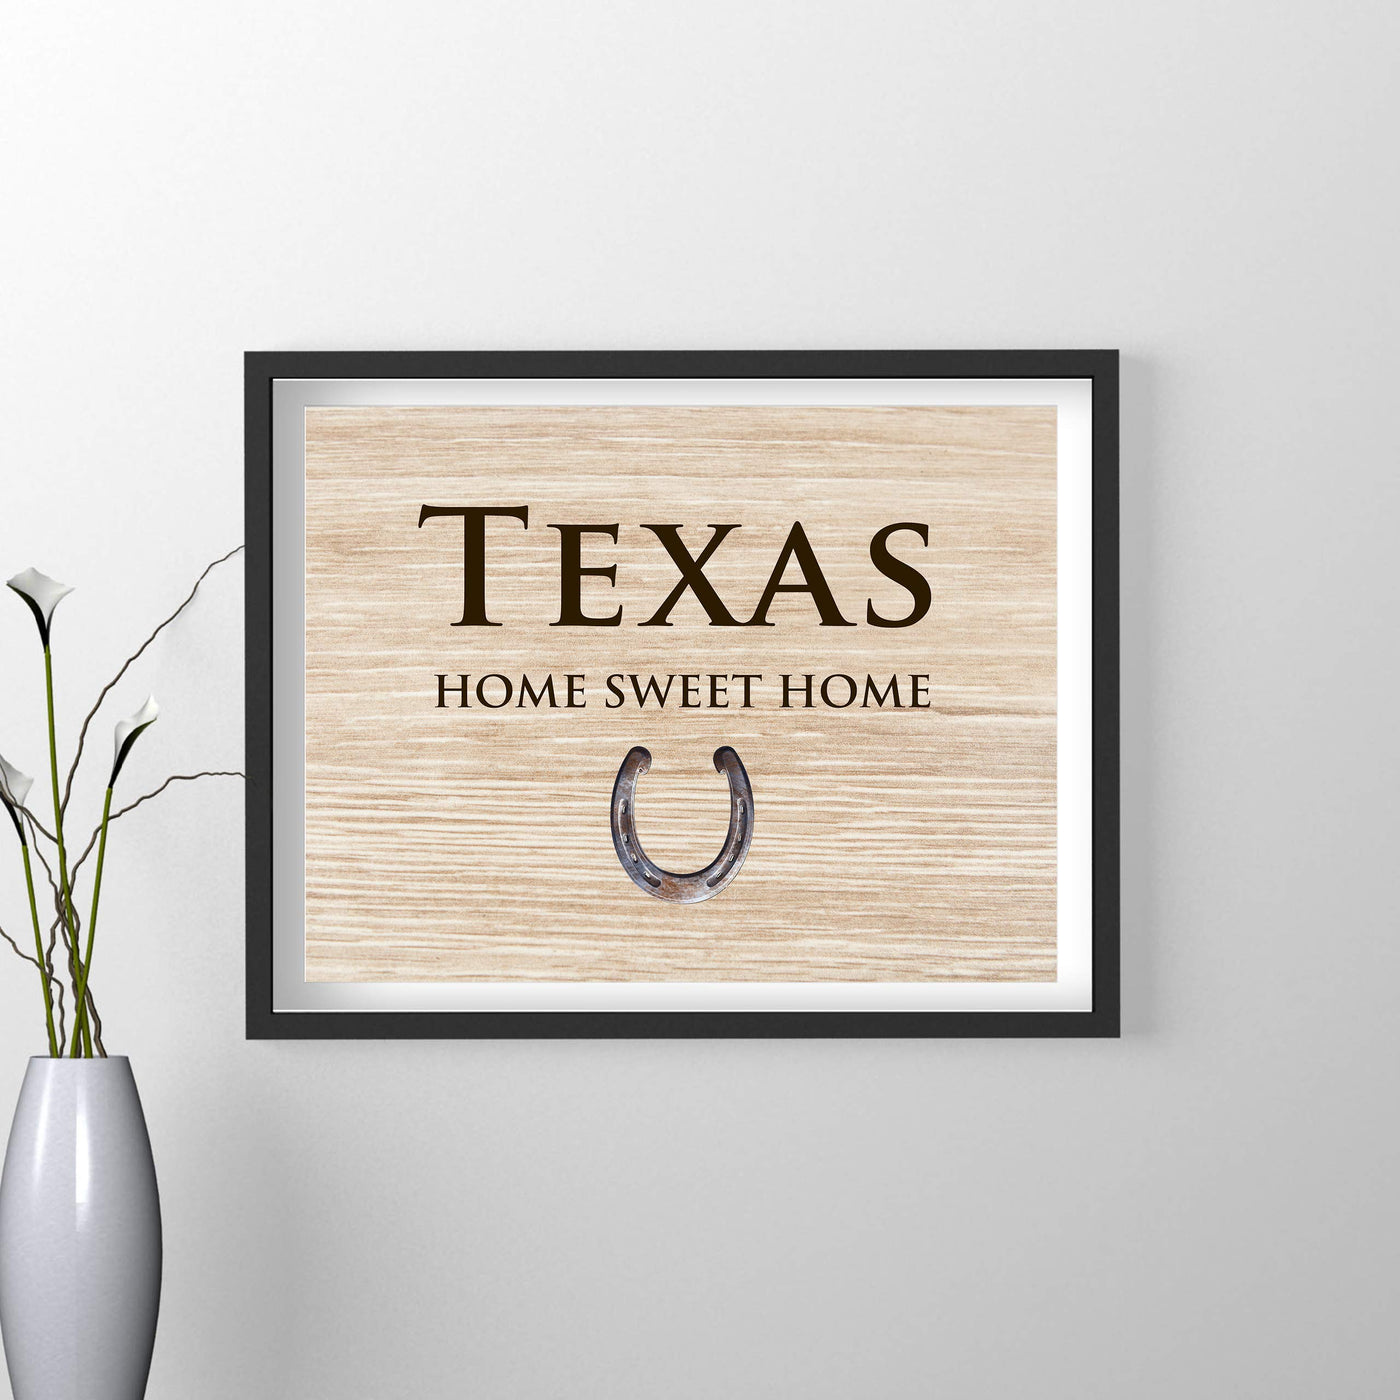 Texas-Home Sweet Home Lone Star State Wall Decor-10 x 8" Country Rustic Family Art Print-Ready to Frame. Western Home-Office-Welcome-Farmhouse Decor. Perfect Southern Gift! Printed on Photo Paper.